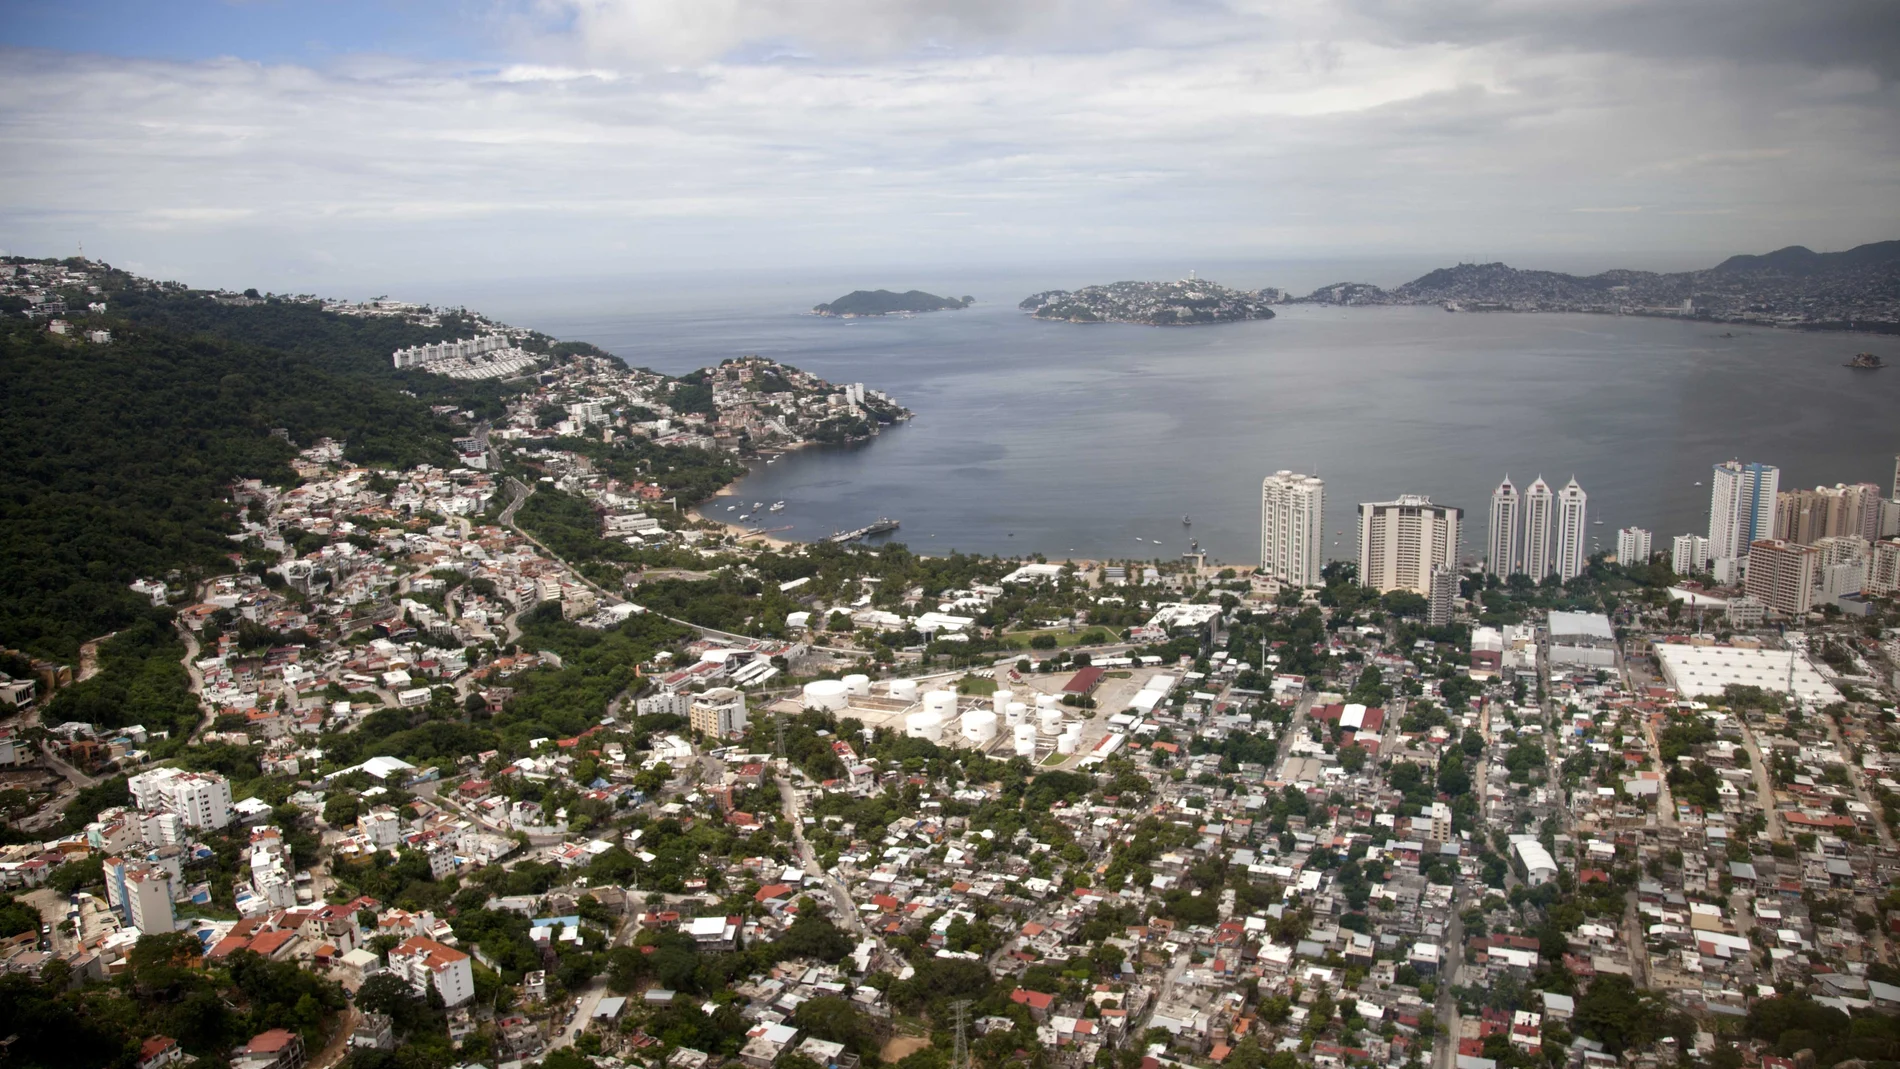 FILE - This Sept. 20, 2013 file photo shows an aerial view of the Pacific resort city of Acapulco, Mexico. The Mexican coastal city pulled a pair of controversial video ads Thursday, Aug. 6, 2020, touting the faded resortâ€™s reputation as an â€œanything goesâ€ tourism destination because they weren't appropriate during the new coronavirus pandemic. (AP Photo/Eduardo Verdugo, File)